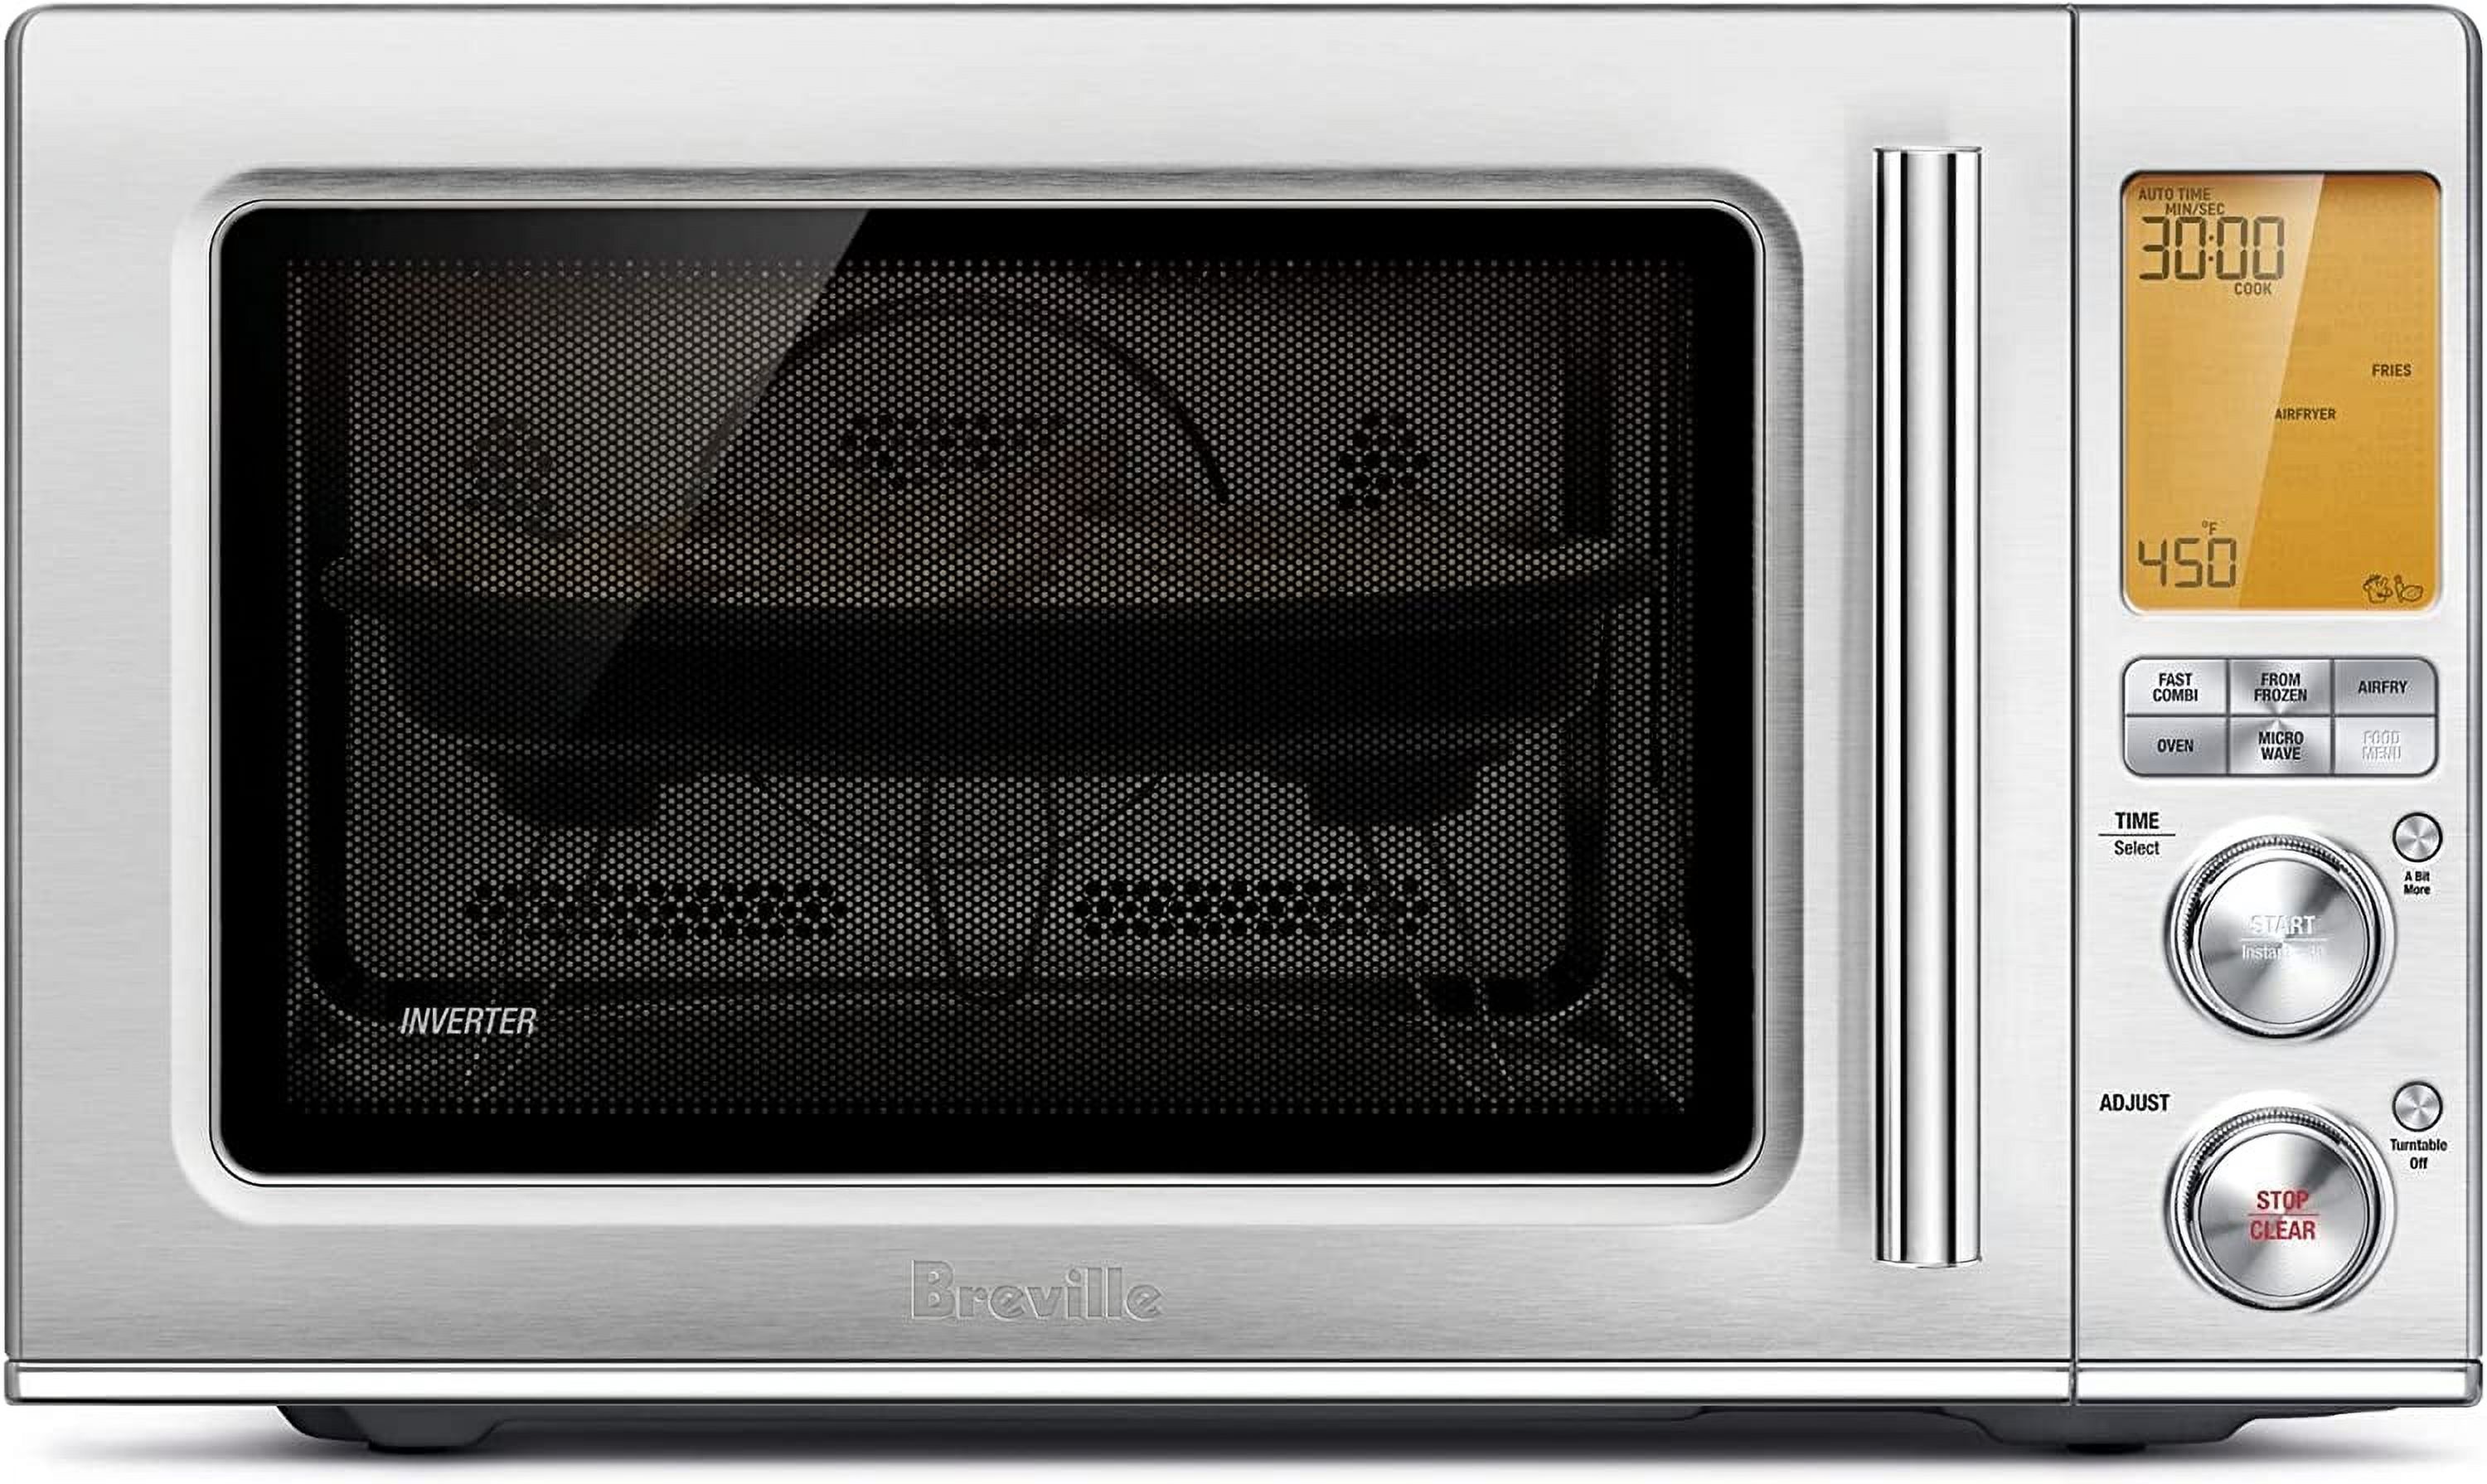 Breville Combi Wave 3-in-1 Microwave, Air Fryer, and Toaster Oven, Brushed Stainless Steel - image 2 of 4